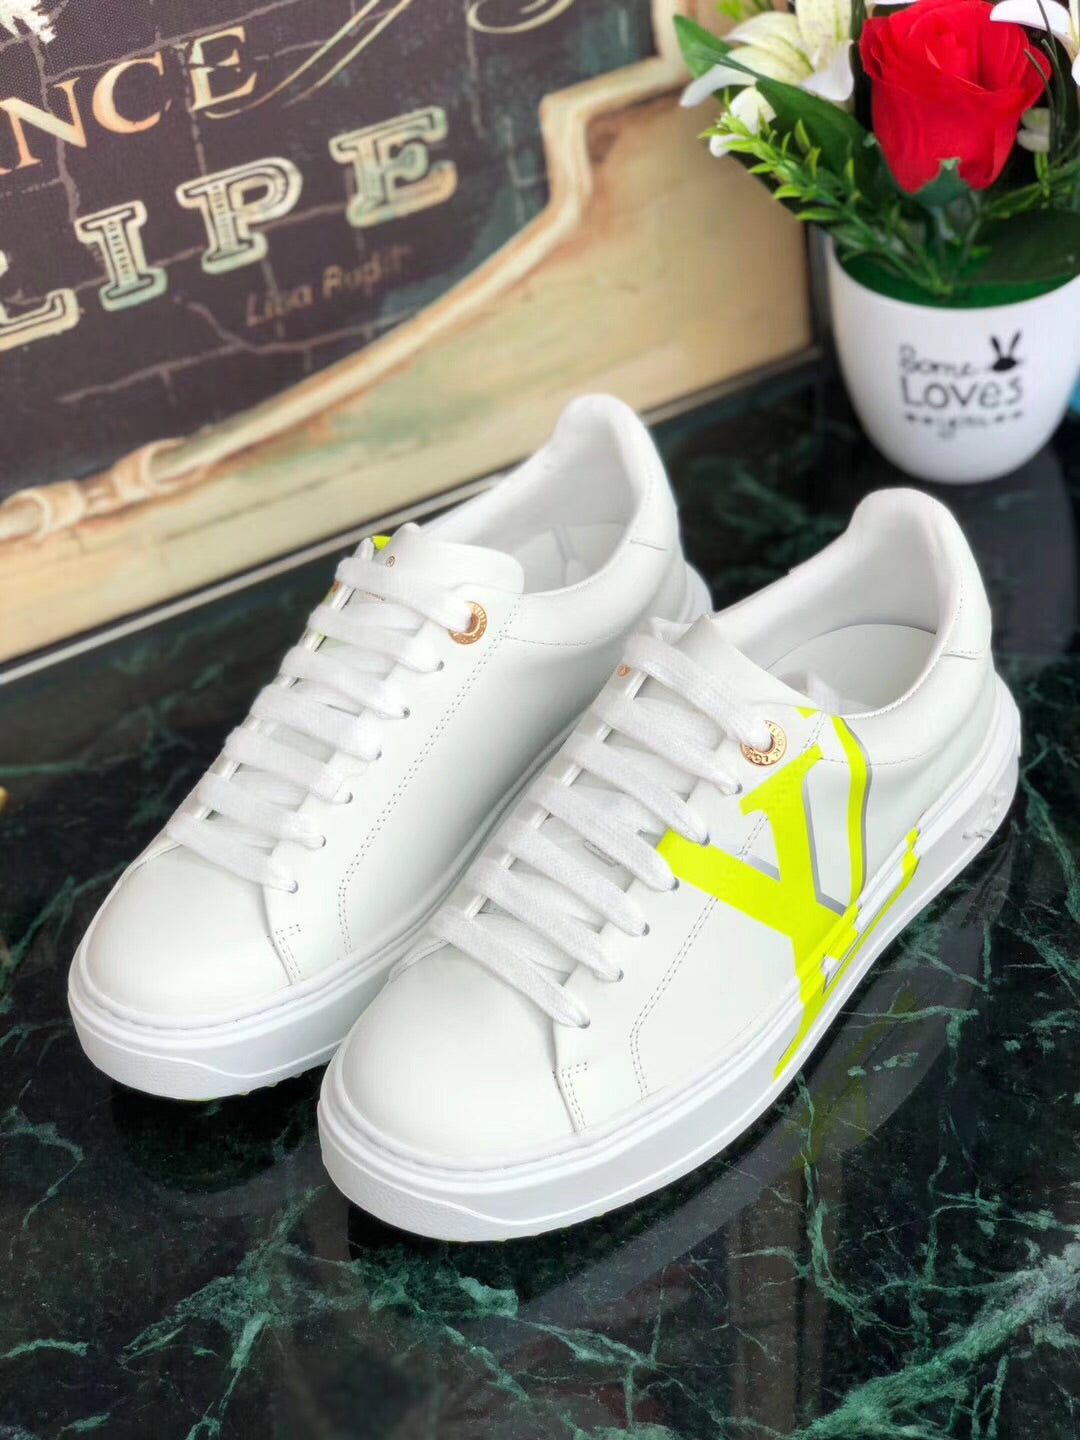 LV SNEAKERS TIME OUT – vlixcogoods